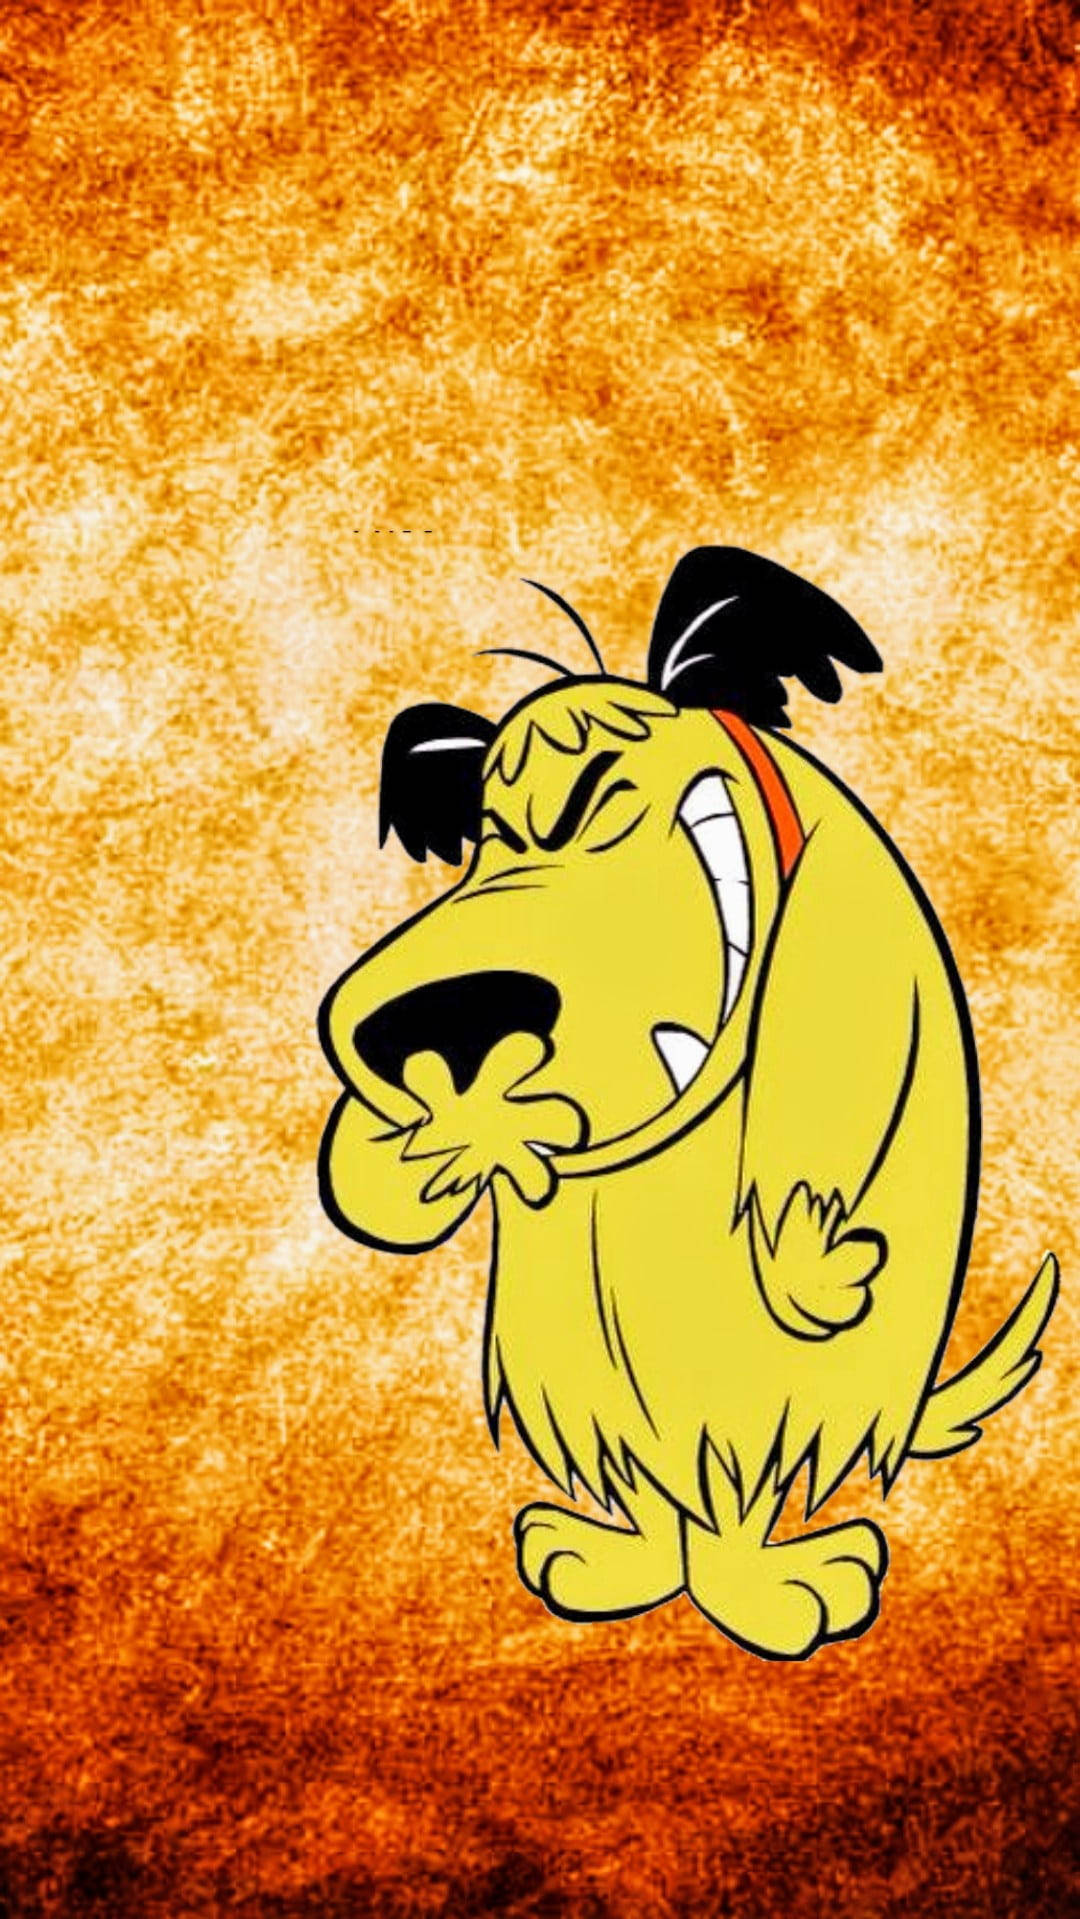 Download Dog Animated Cartoon Muttley Wallpaper 